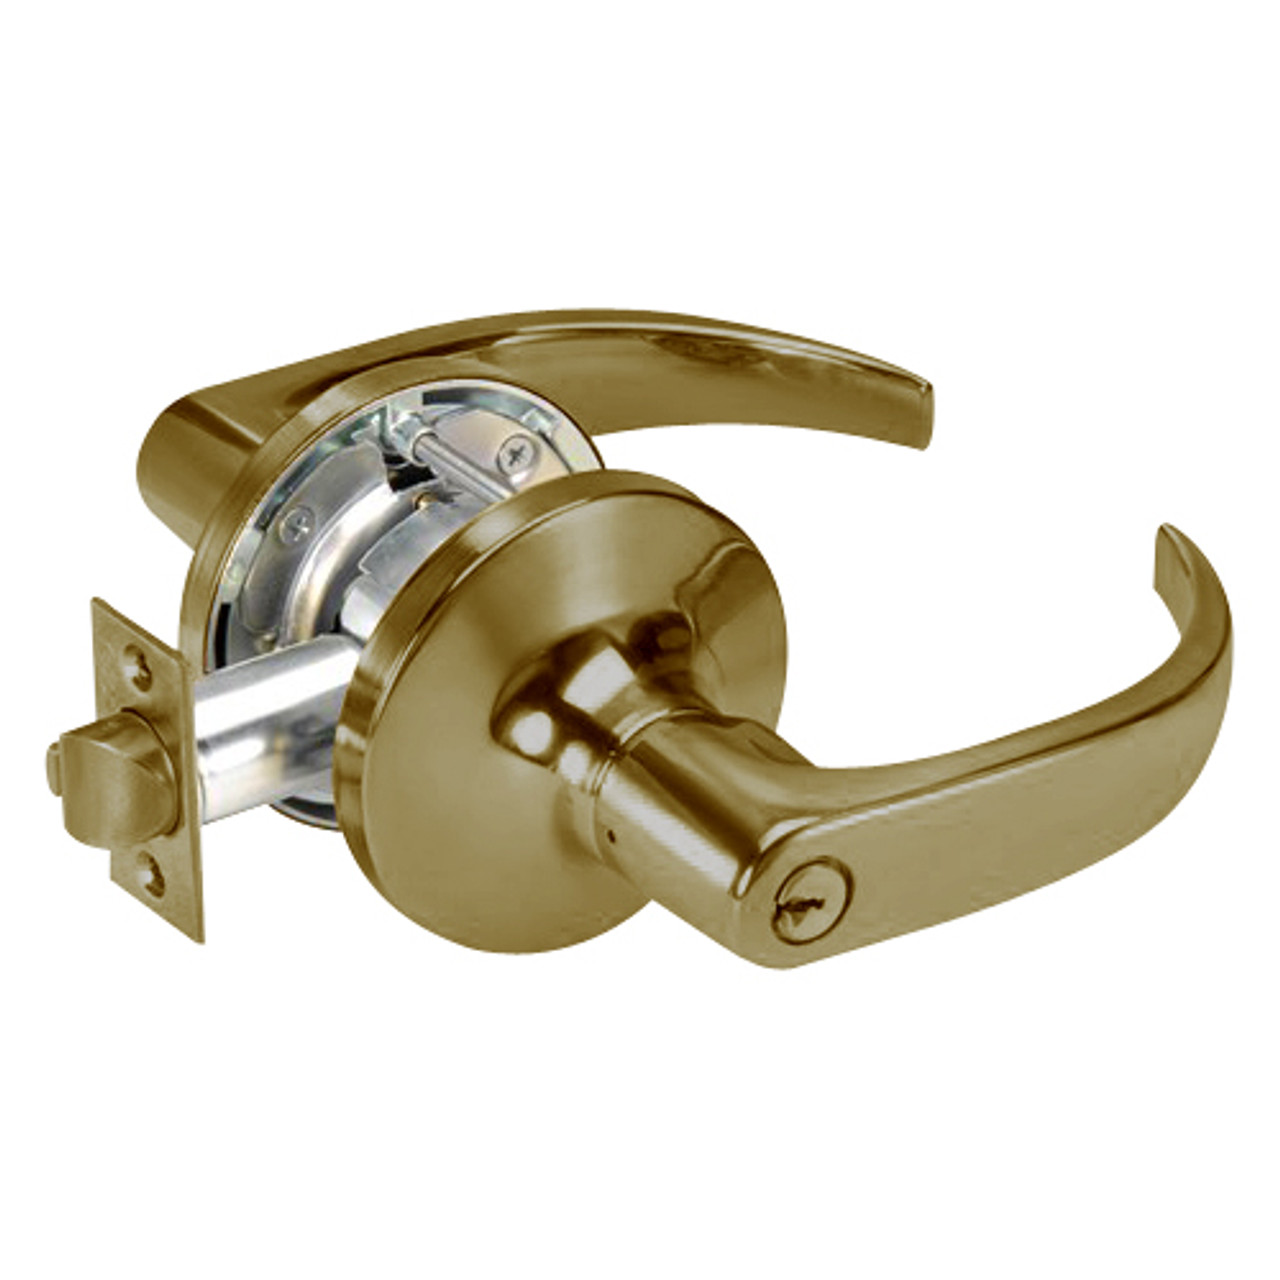 PB5407LN-609 Yale 5400LN Series Single Cylinder Entry Cylindrical Lock with Pacific Beach Lever in Antique Brass